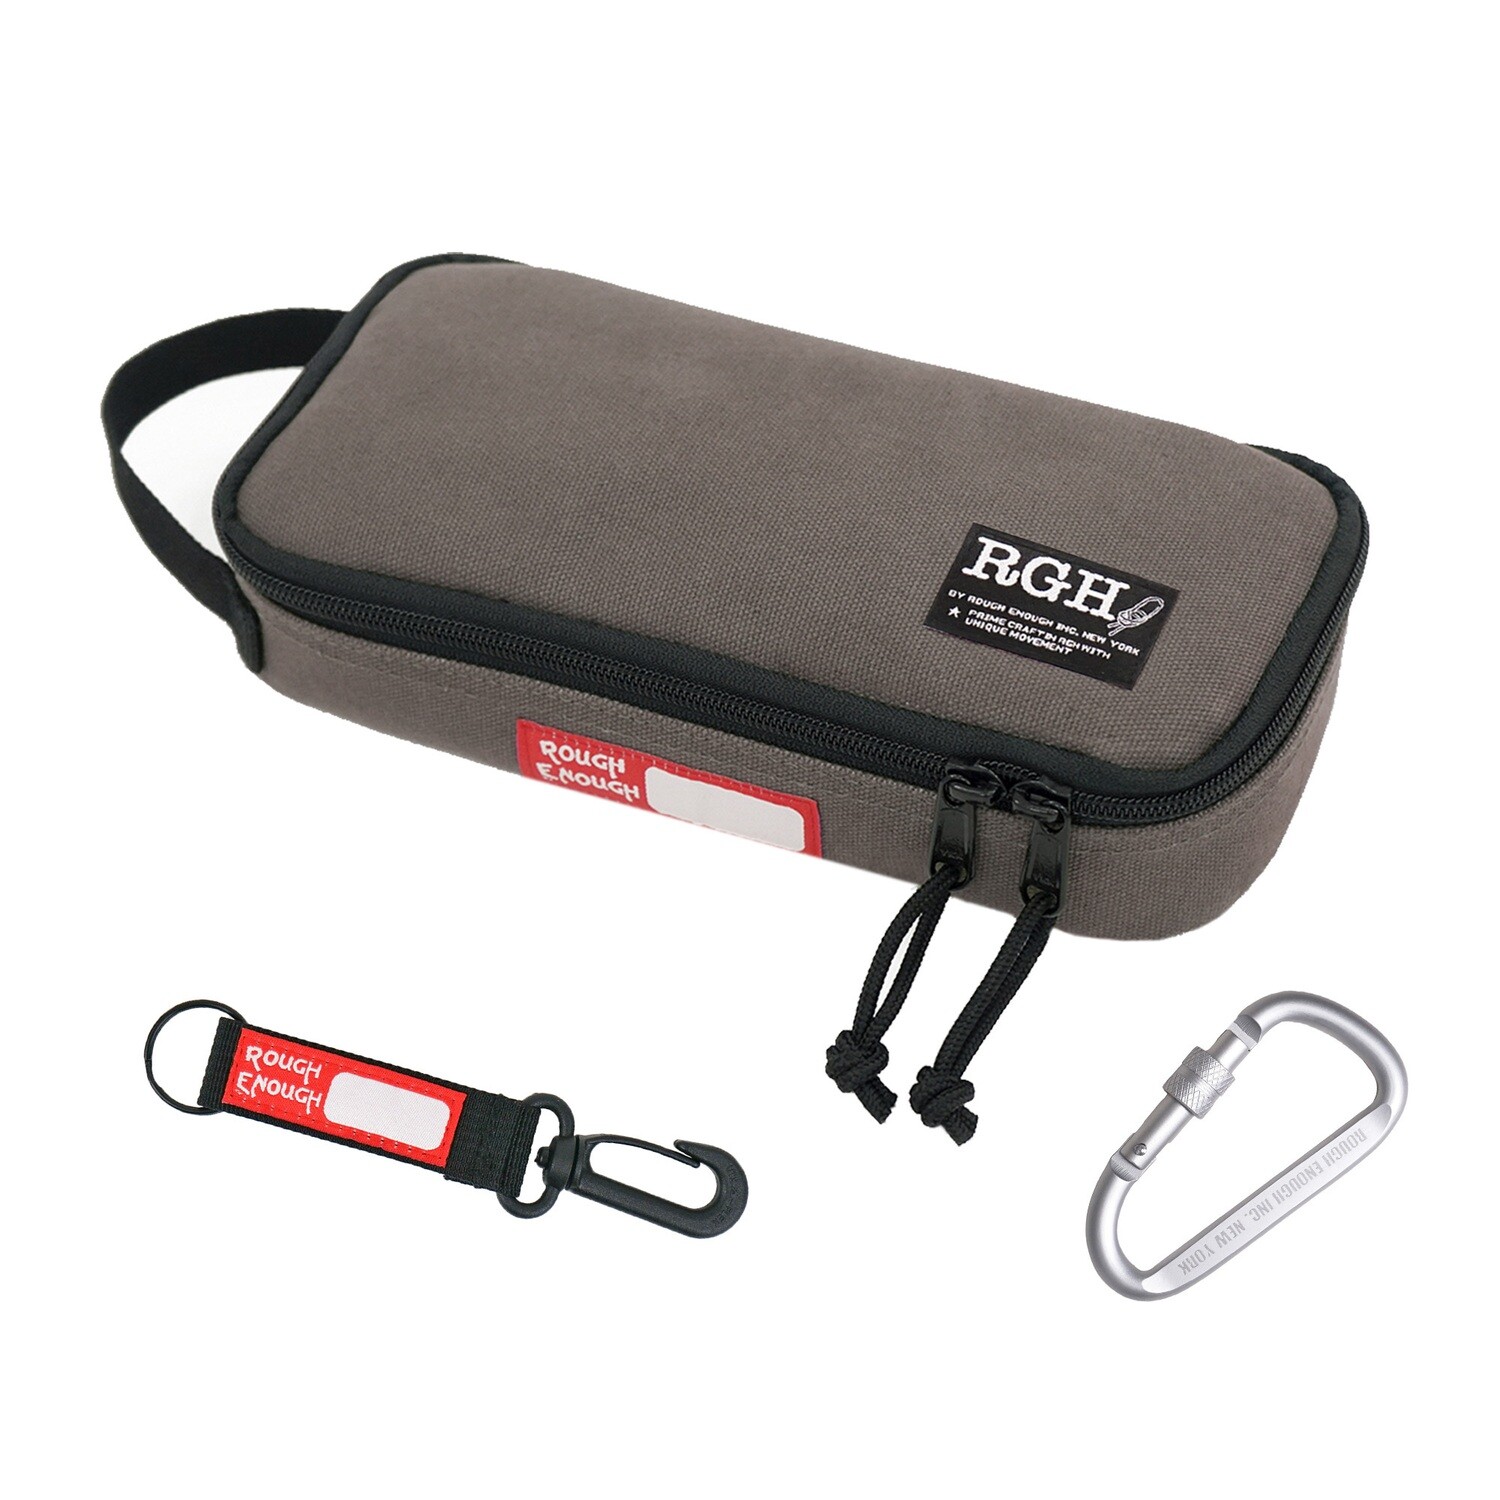 RE8264-Grey Rough Enough Small Tool Bag Pouch Large Pencil Case Box for Adults Boys with Zipper Handle Canvas